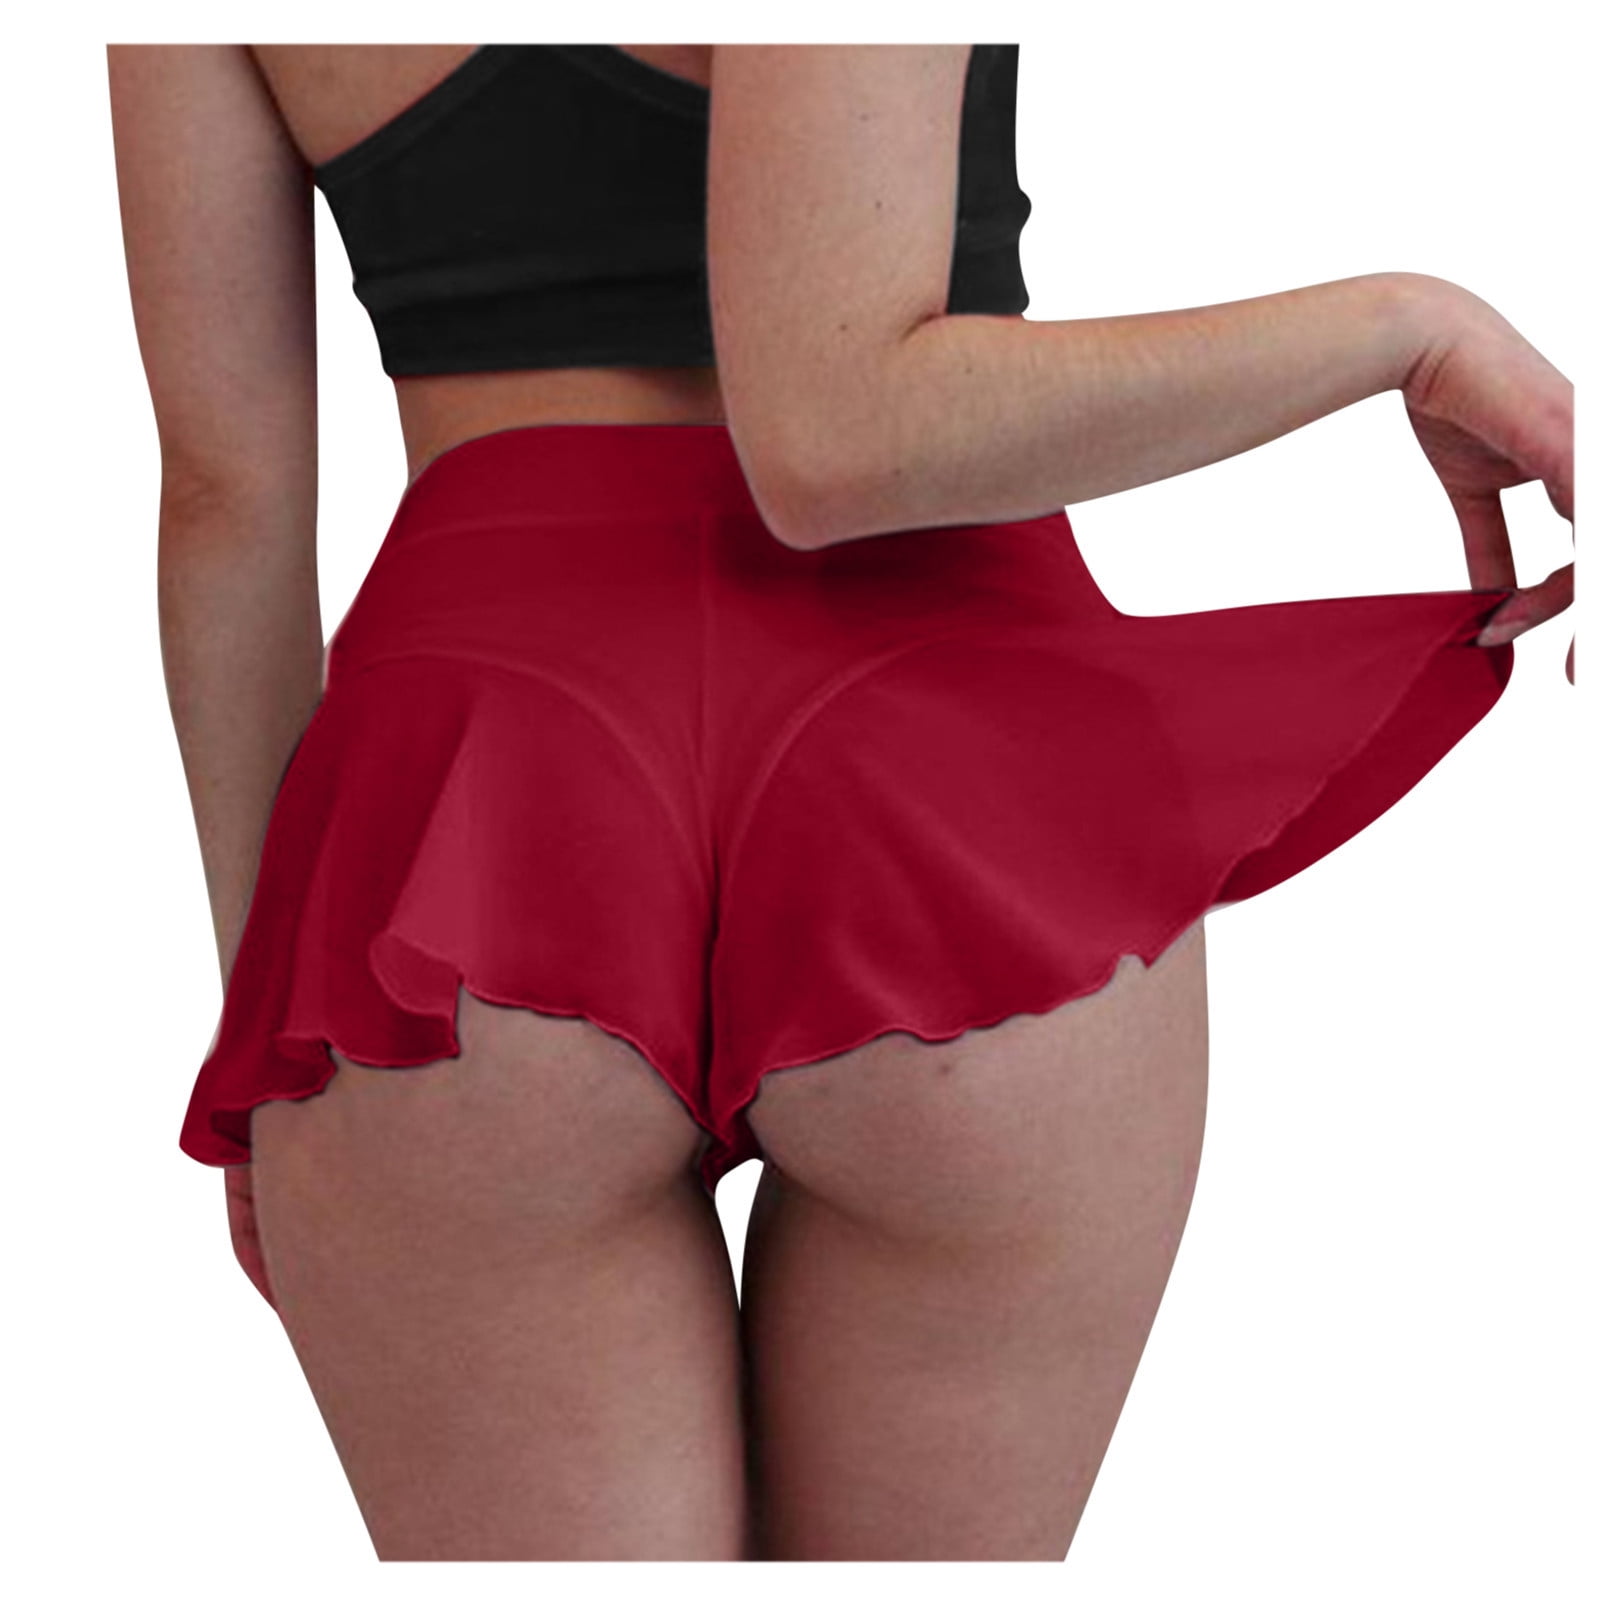 Womens Sexy Mesh Shorts Mini Lingerie Skirts Ruffle Panties High Waist Hot Pants Sex Underwear and Nightclothes picture